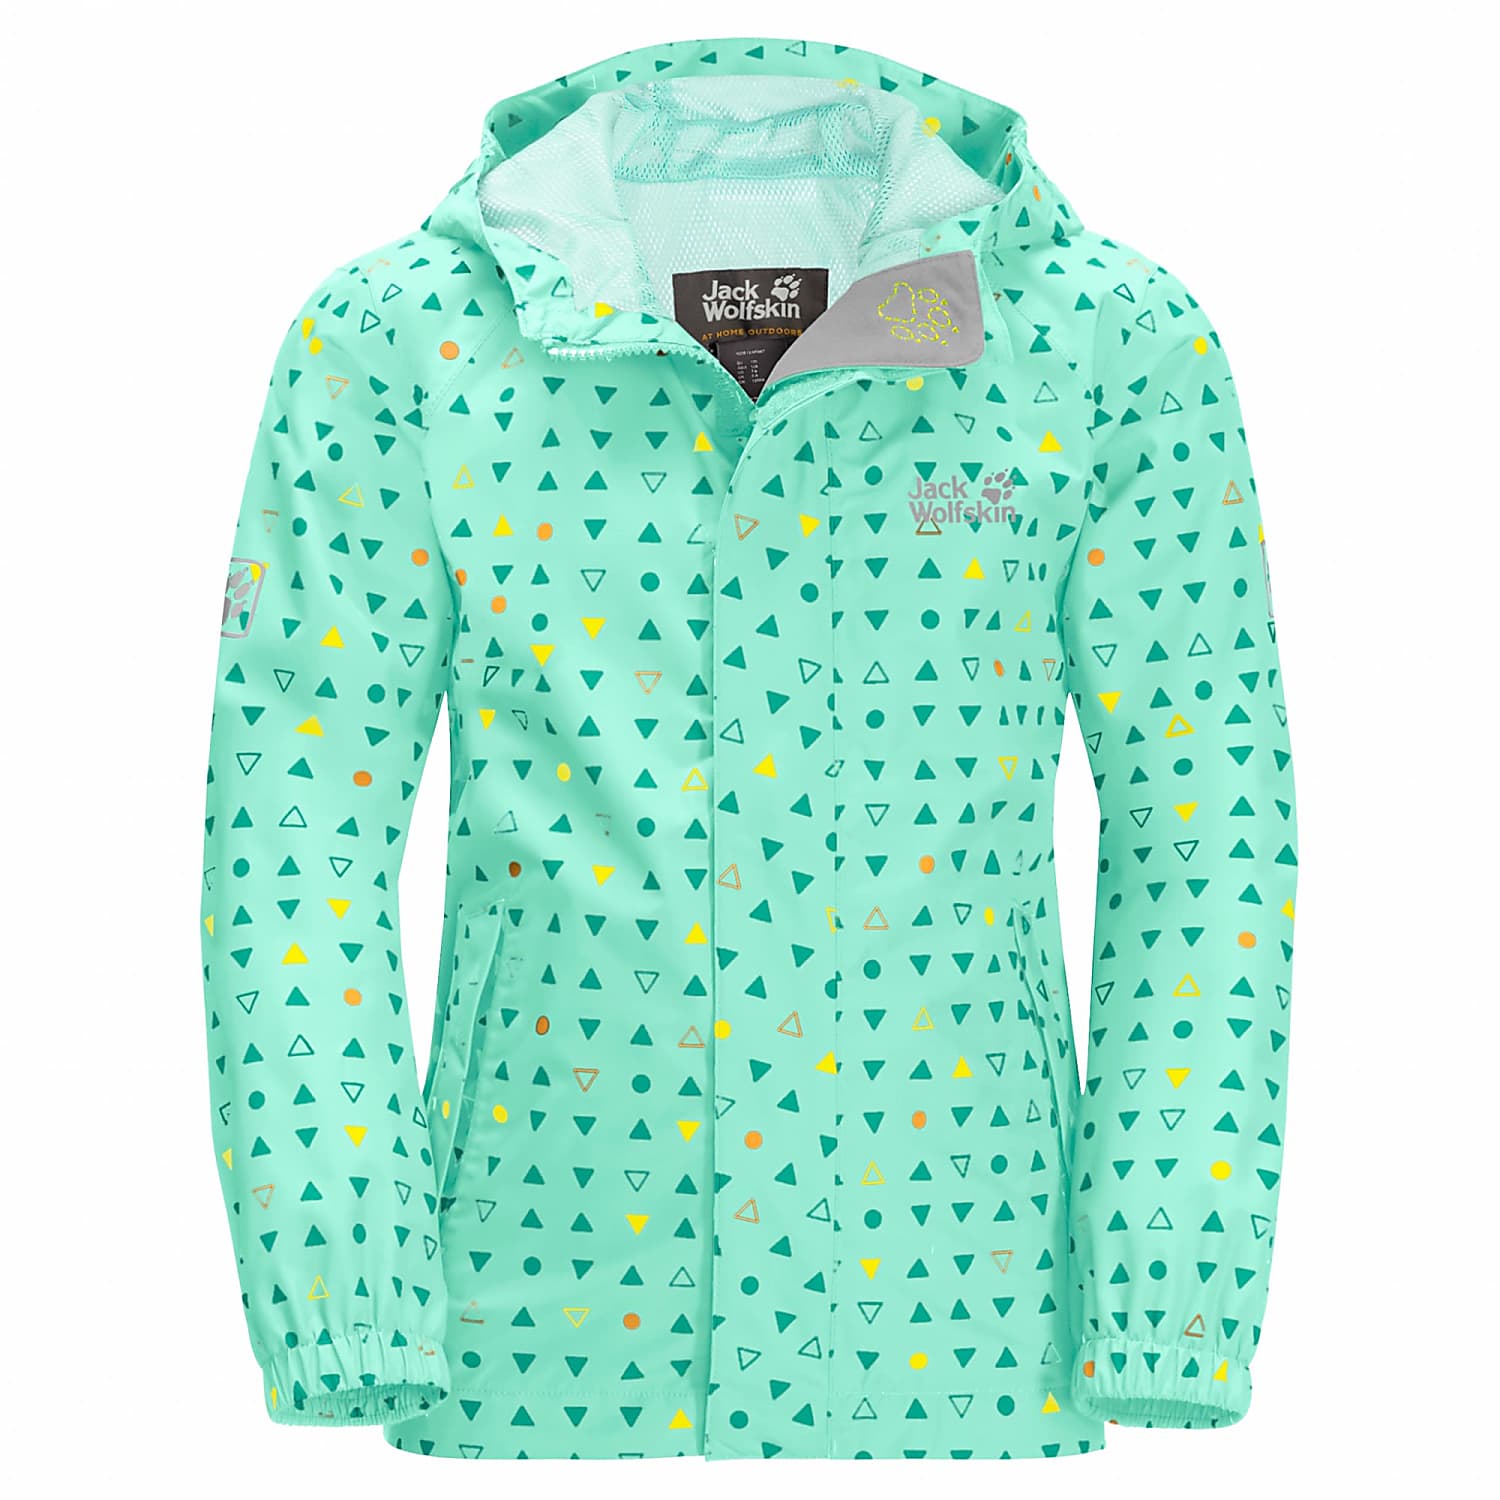 Wolfskin All shipping - TUCAN cheap KIDS Opal Jack Fast and JACKET, Over DOTTED